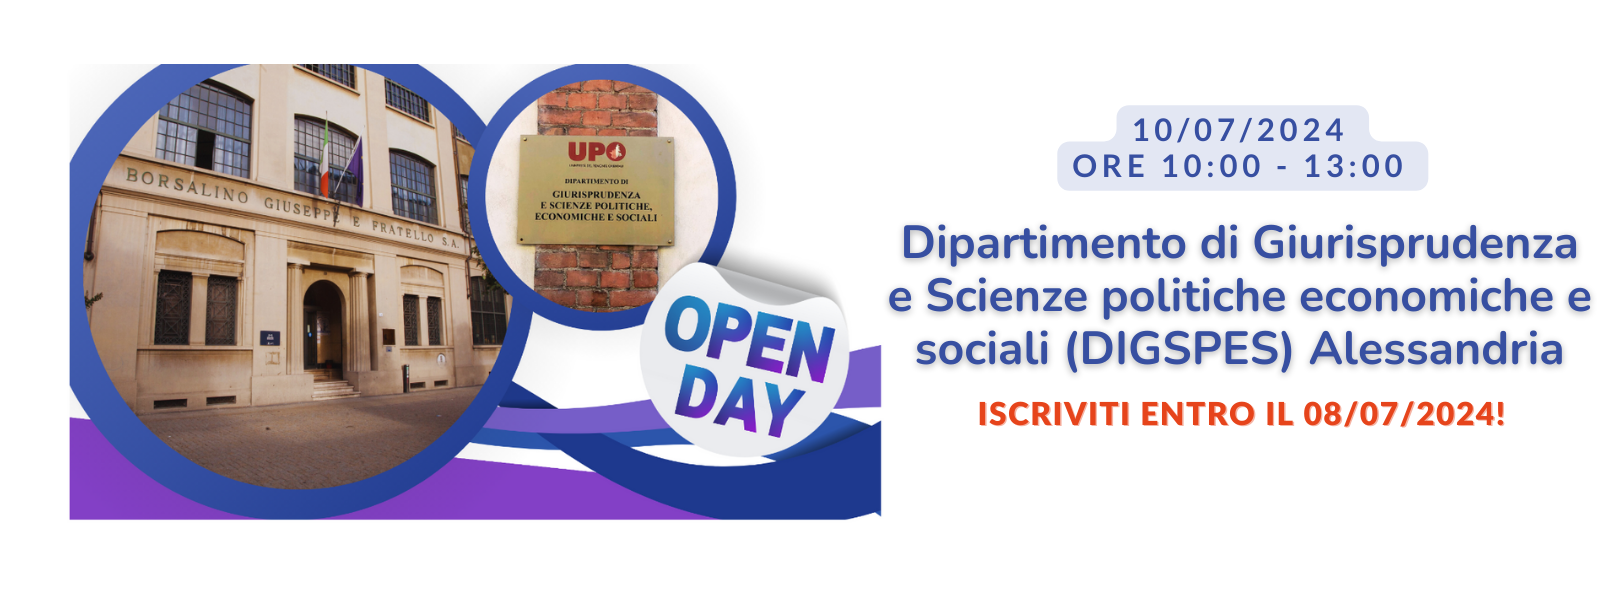 Open Day DIGSPES Alessandria